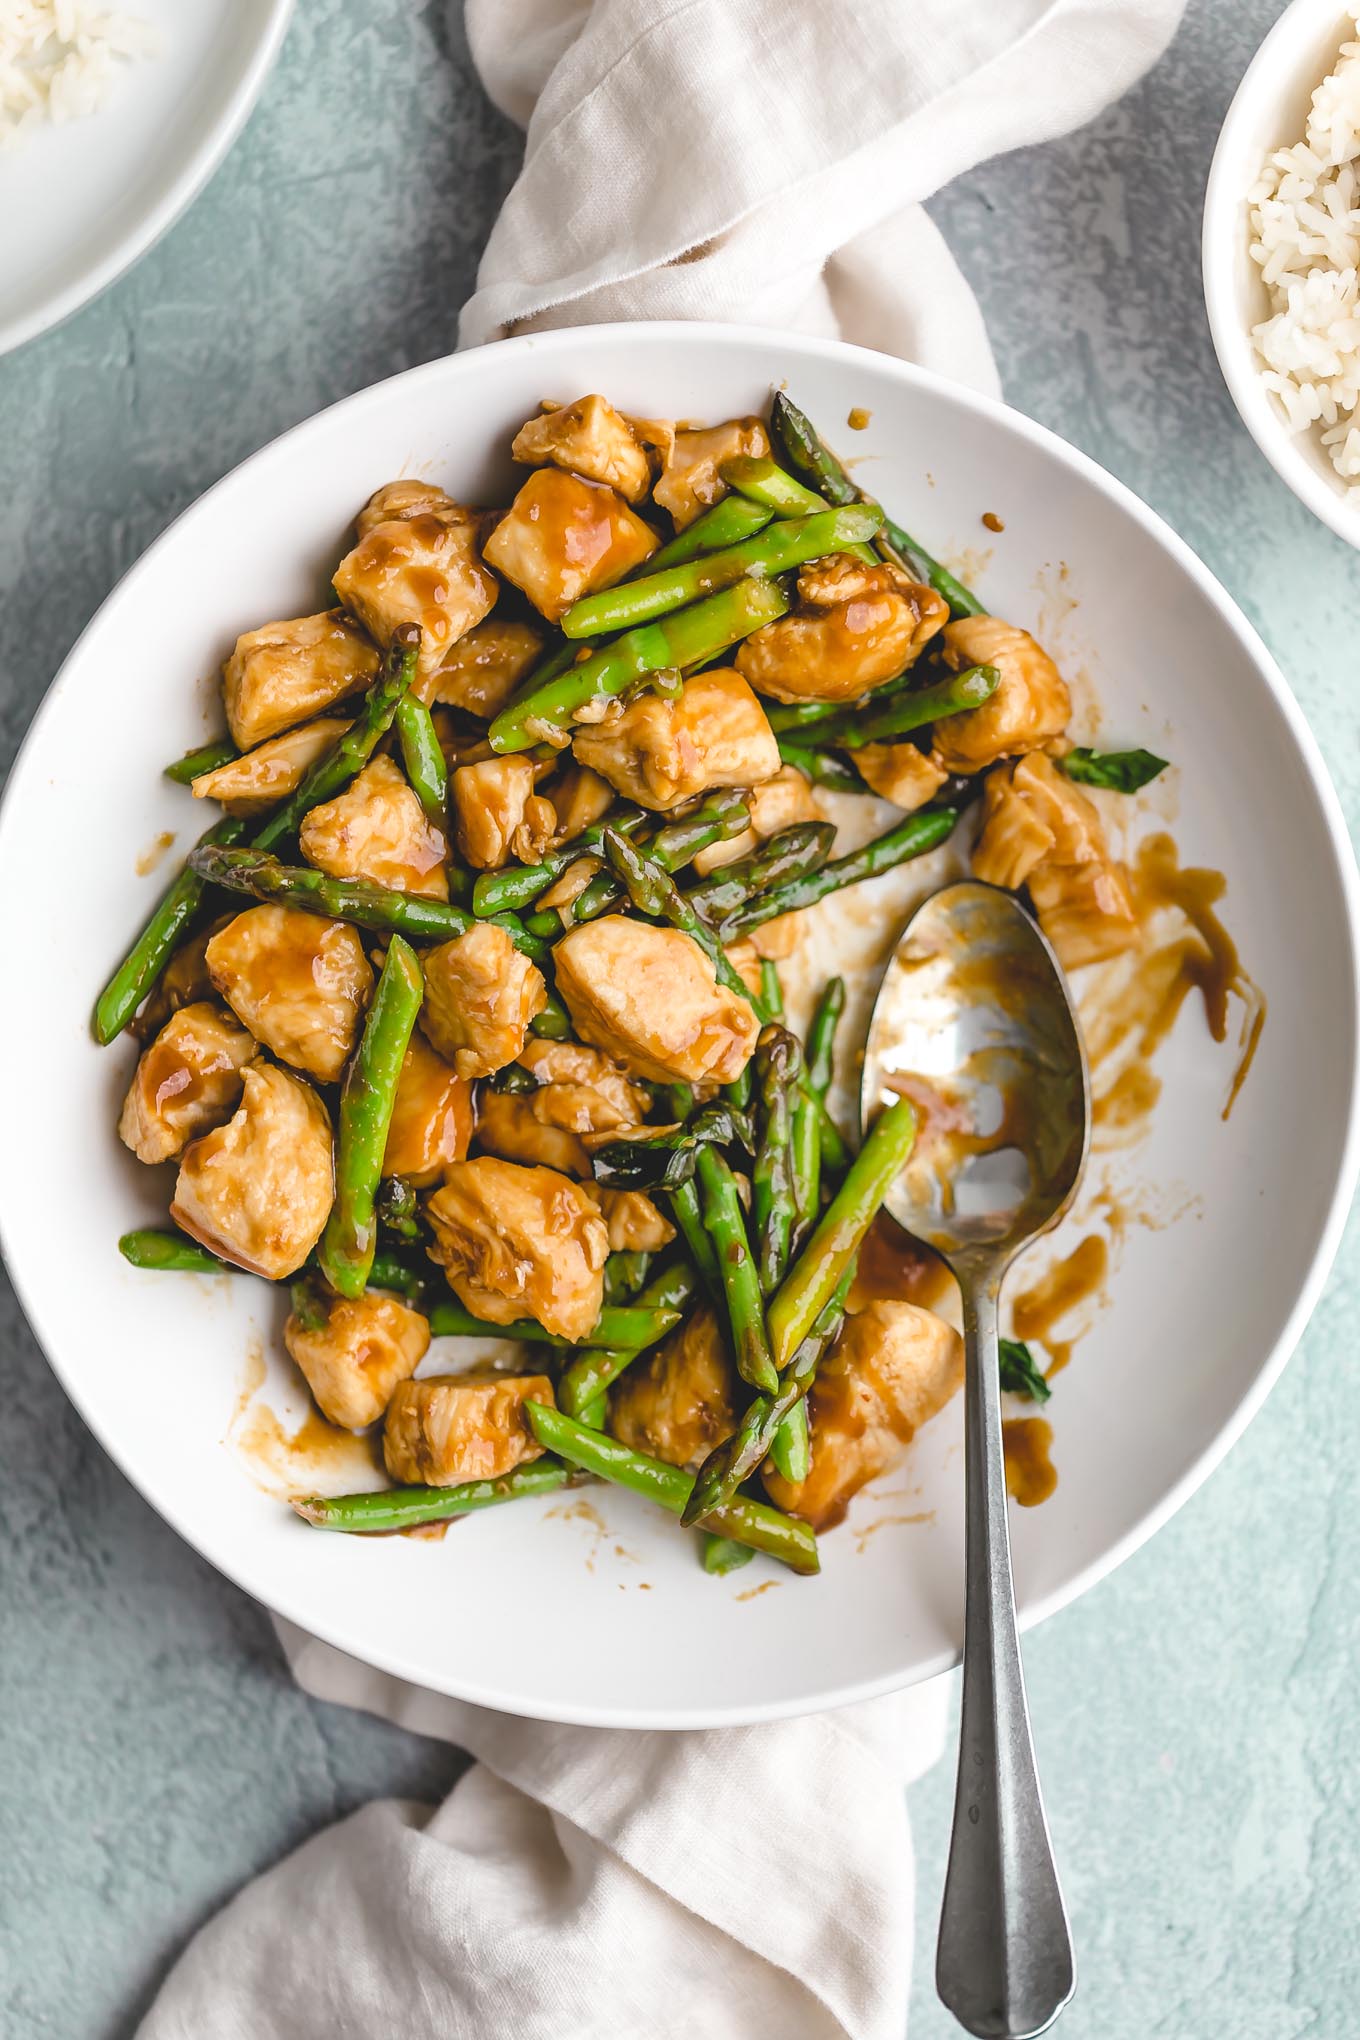 Spicy Basil Chicken Stir Fry (287 calories) - a fragrant and fresh Asian stir fry recipe that's ready in 20 minutes! 